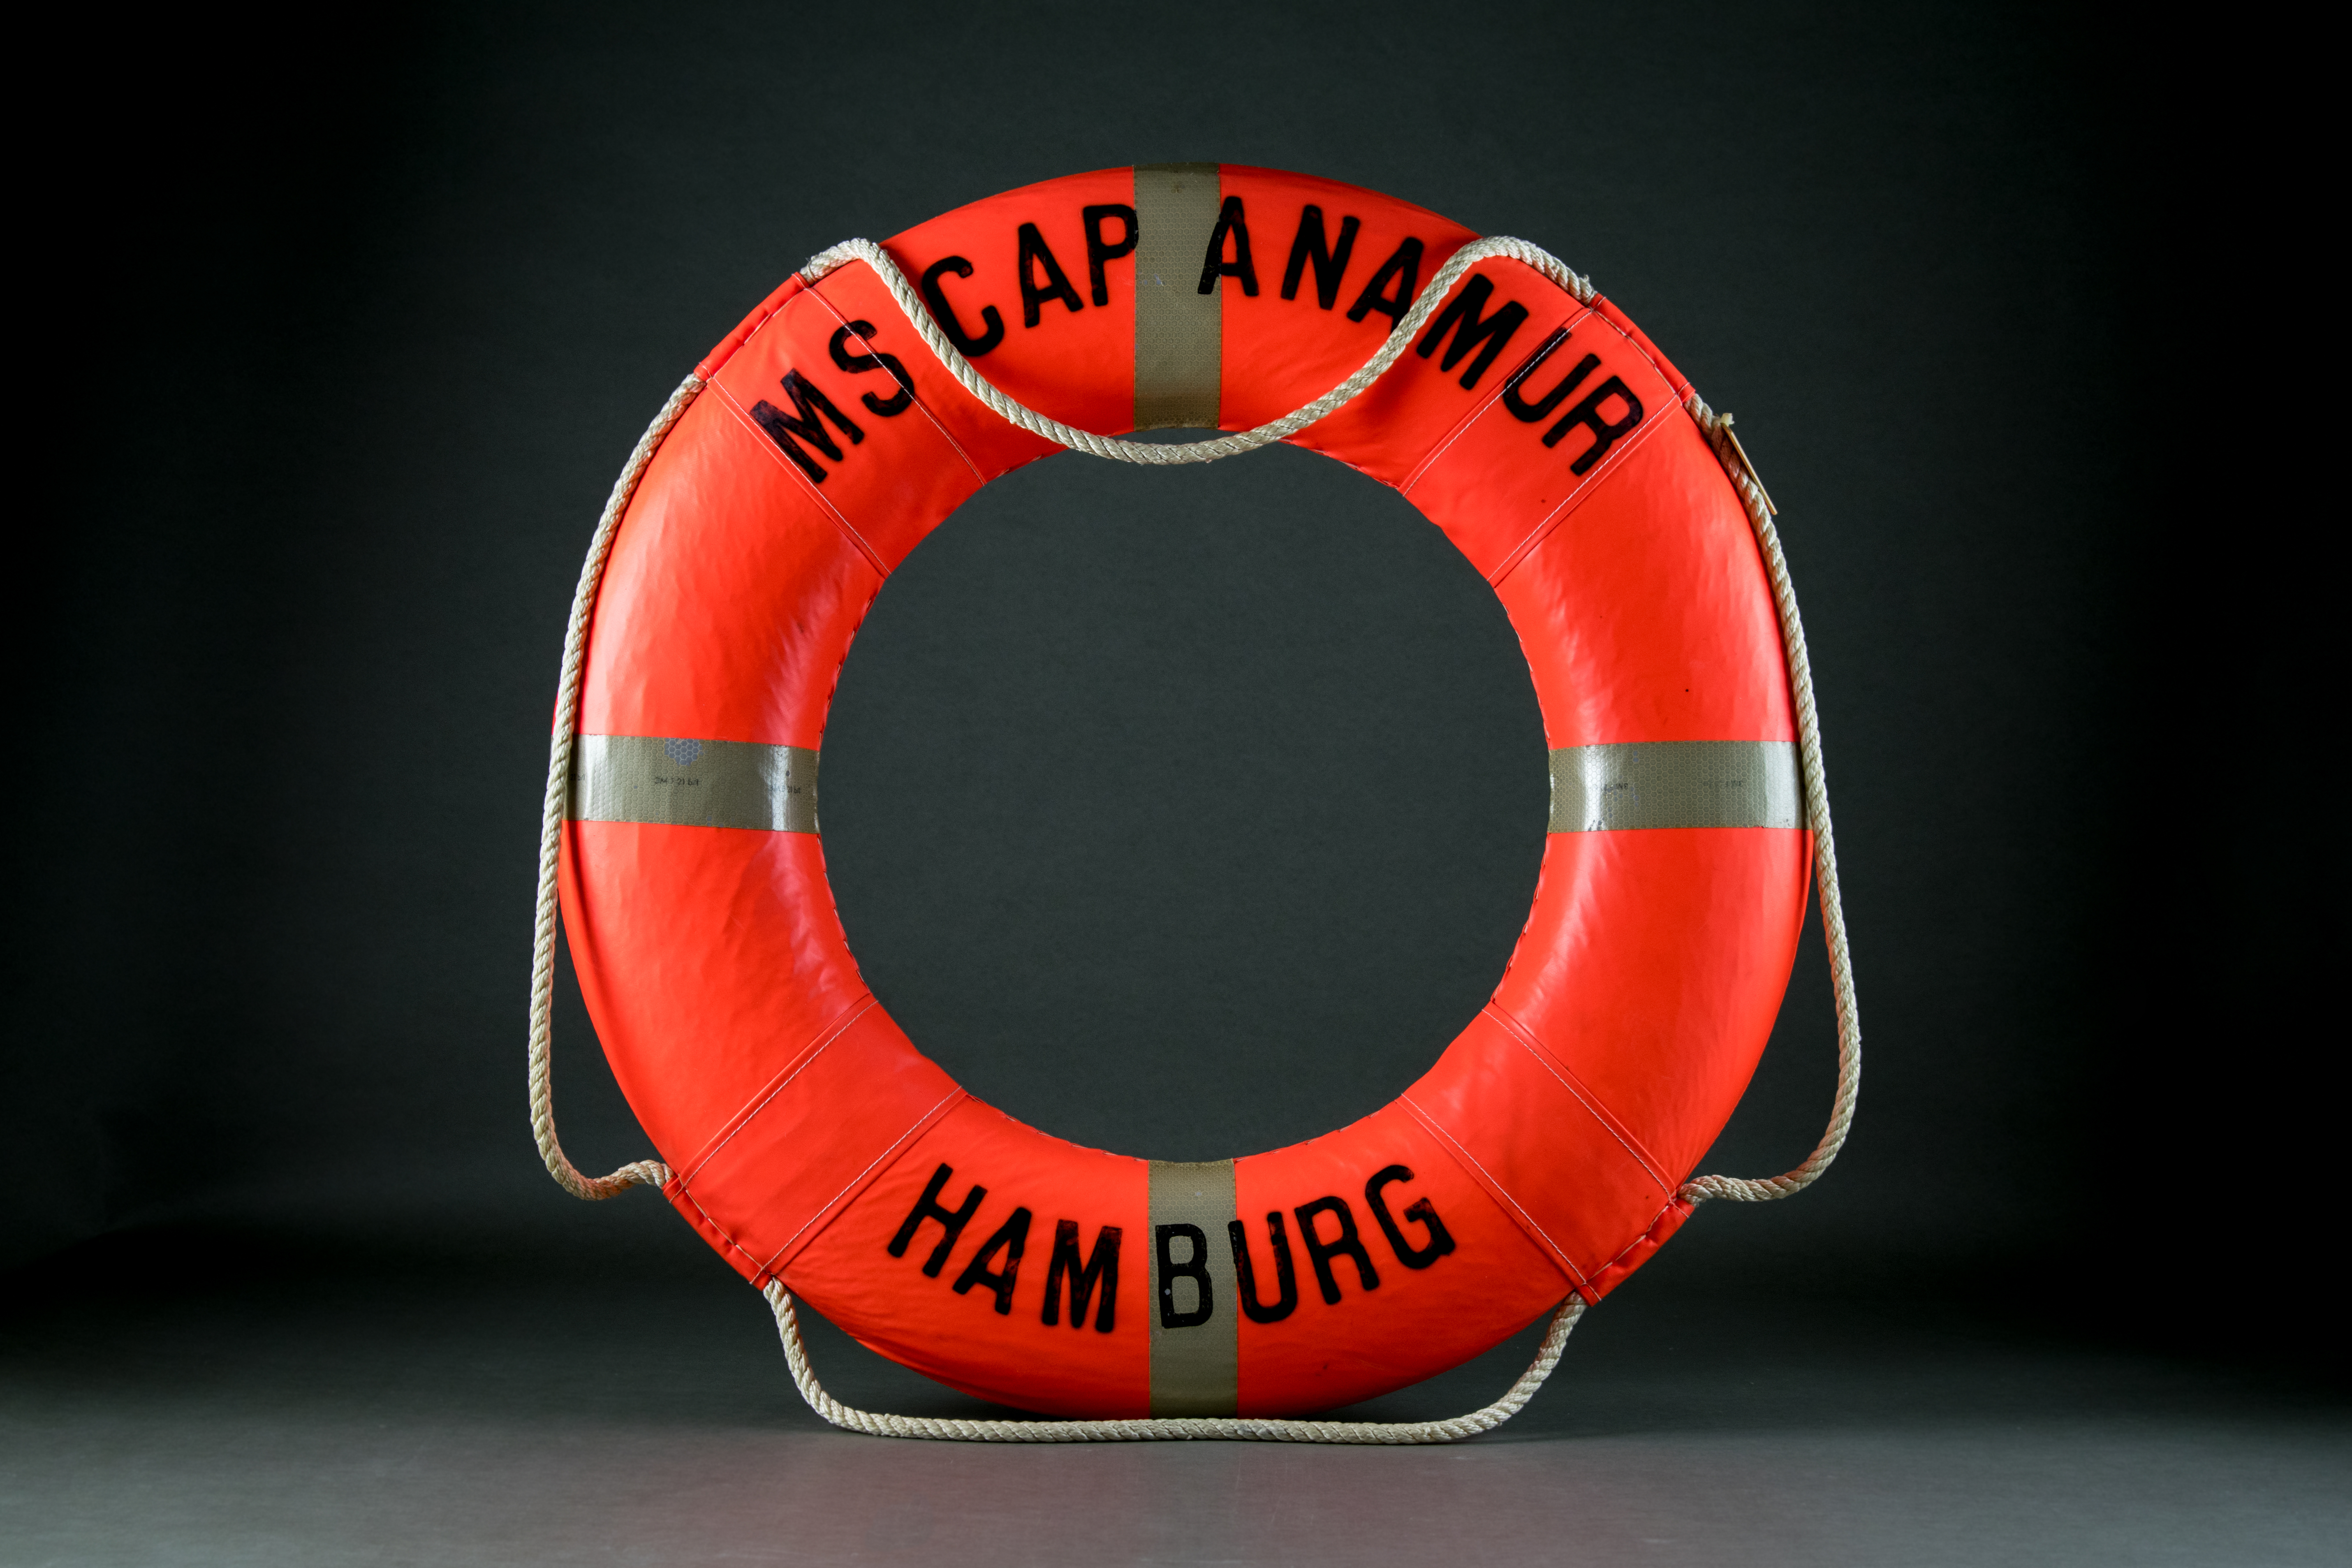 Life buoy from the hospital ship Cap Anamur I, with which almost 10,000 boat people were rescued from the South China Sea, c. 1980 © Thomas Huân Nguyễn, DOMiD-Archiv, Köln, E 1466,0003